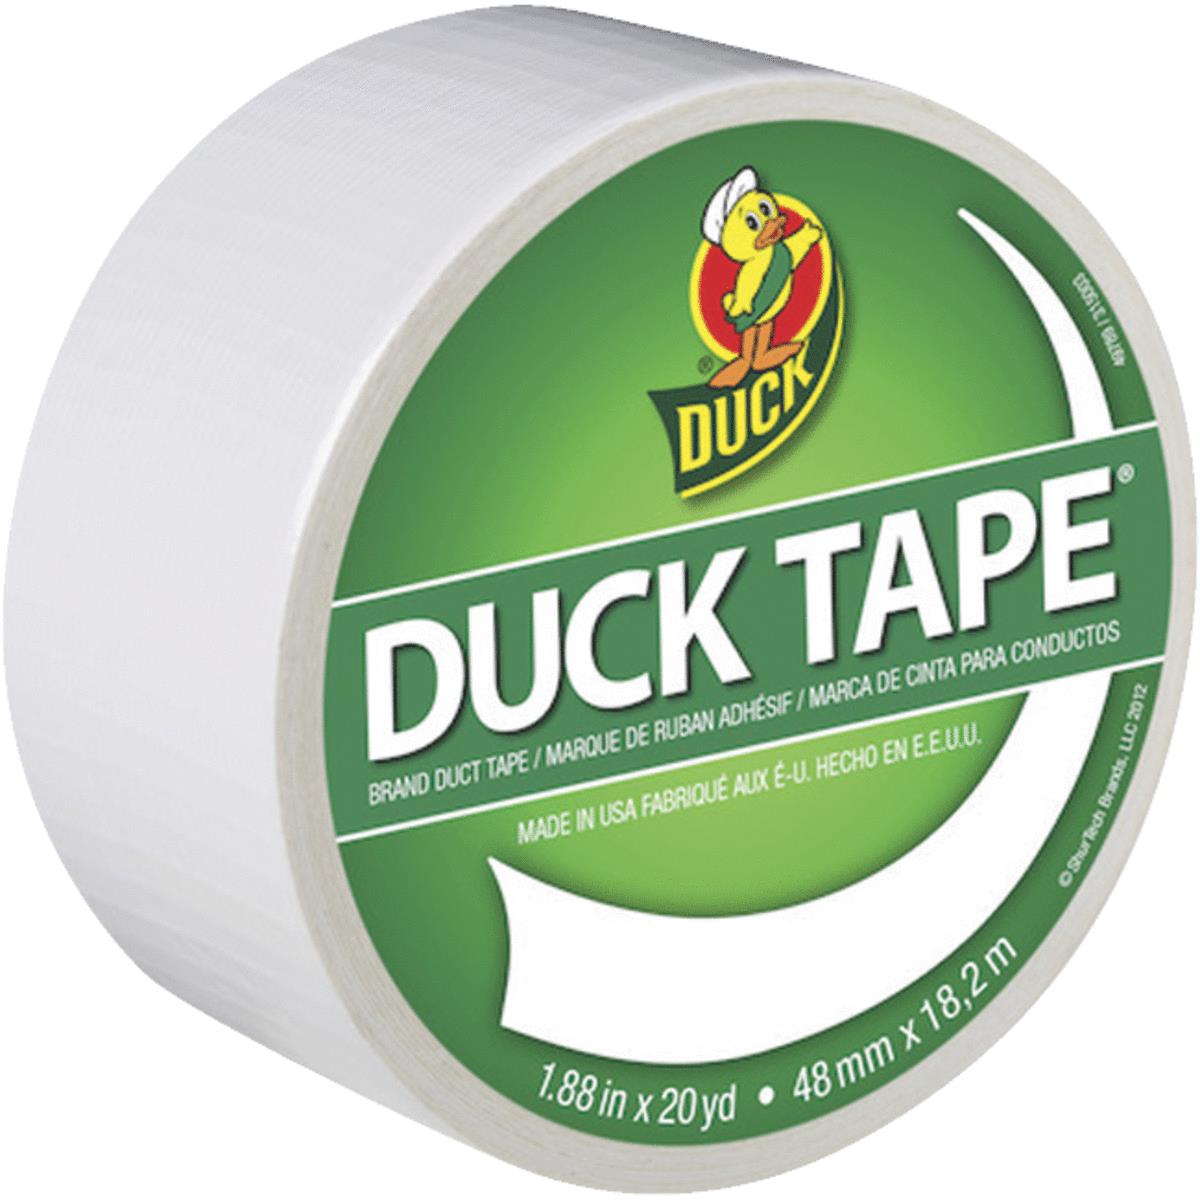 Duck Brand Self-Adhesive Fiberglass Drywall Joint Tape, 1.88 in. x 180 ft., White